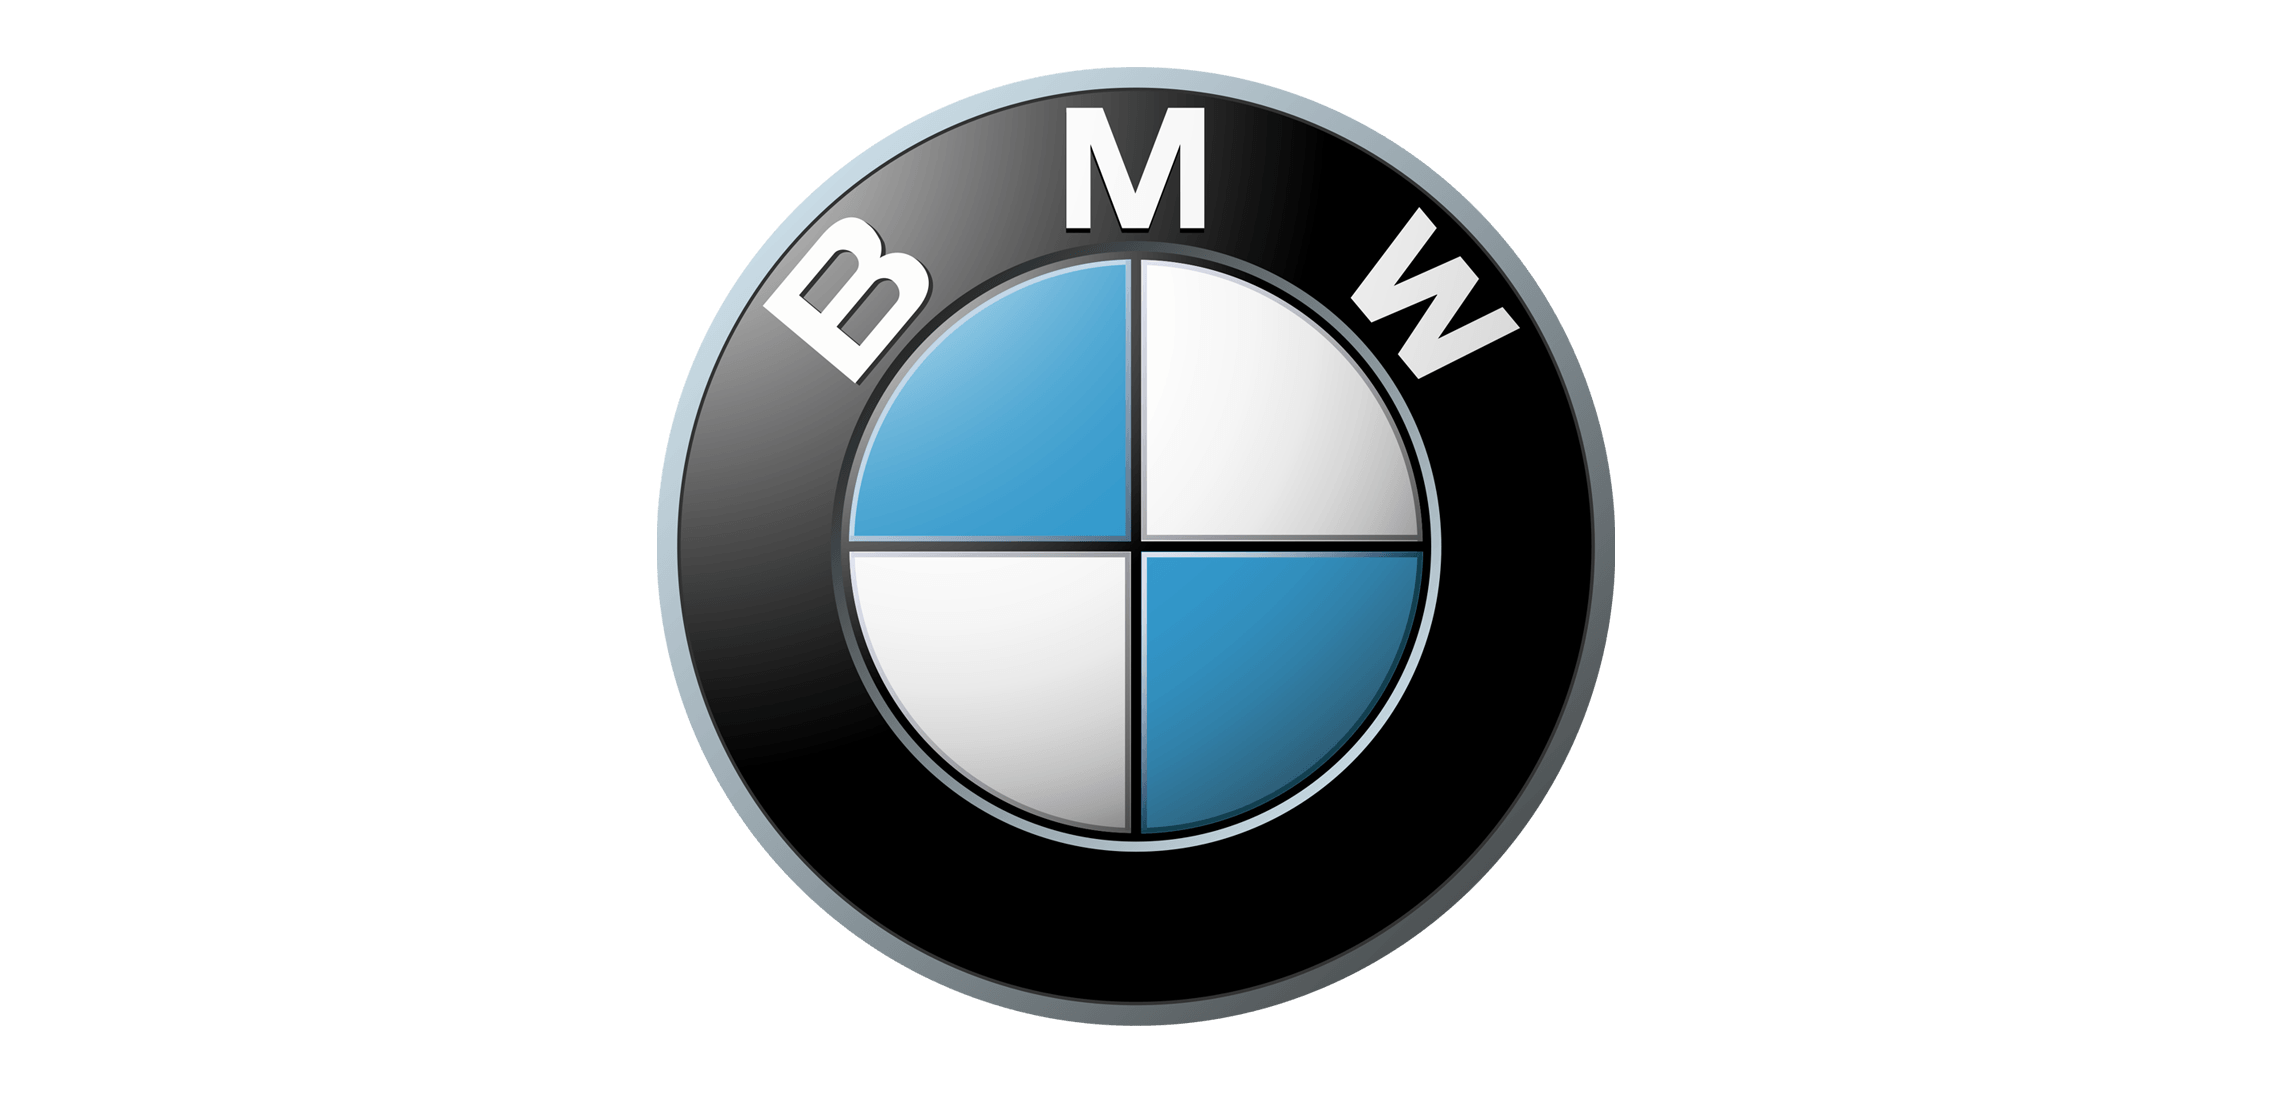 Subsidiary of BMW Logo - BMW Logo Meaning and History. Symbol BMW. World Cars Brands